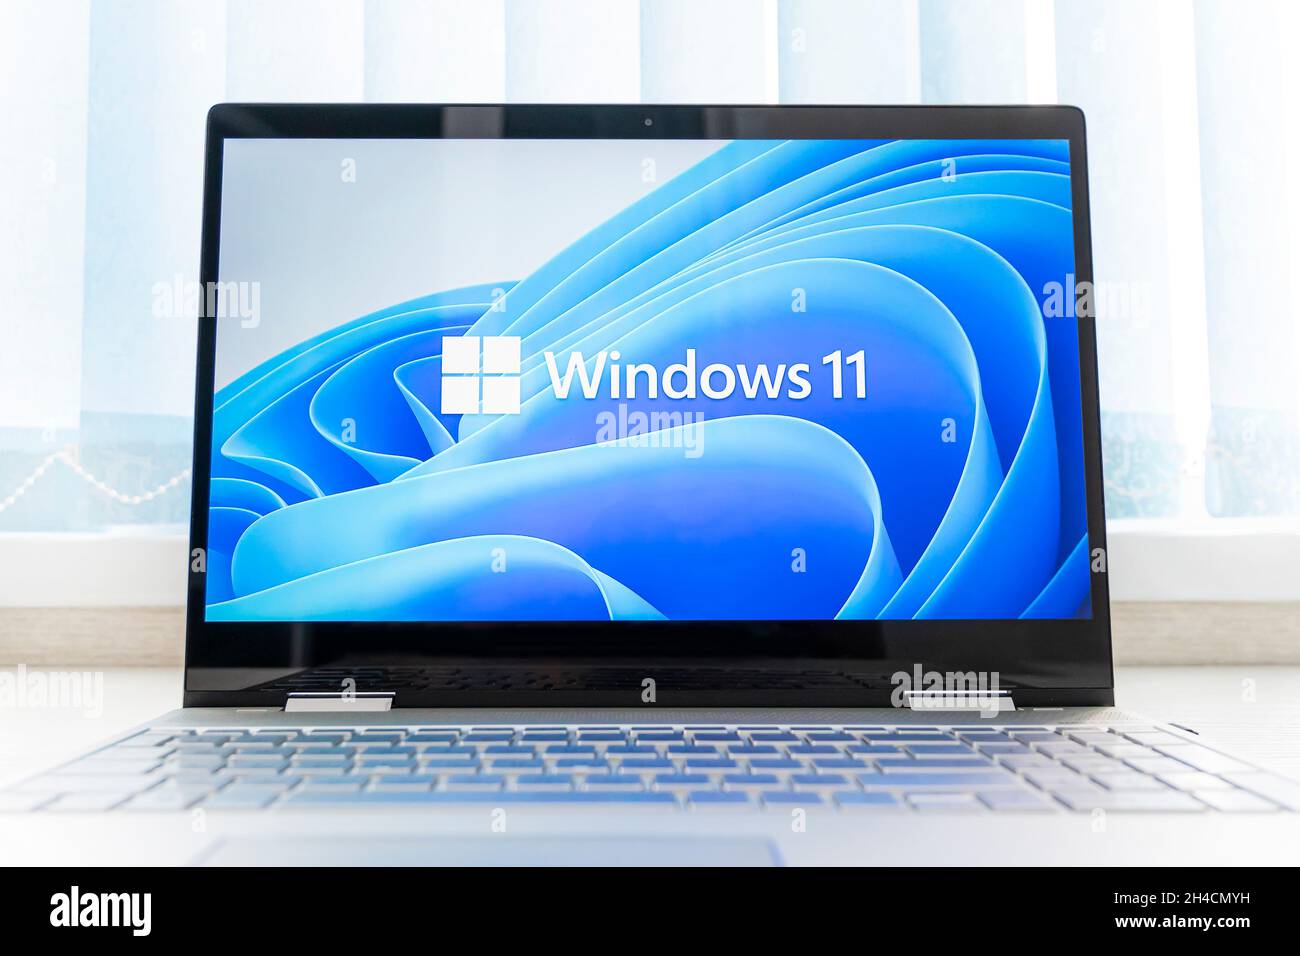 November 2, 2021. Barnaul, Russia. Windows 11 logo on laptop screen. A new operating system update from Microsoft Stock Photo